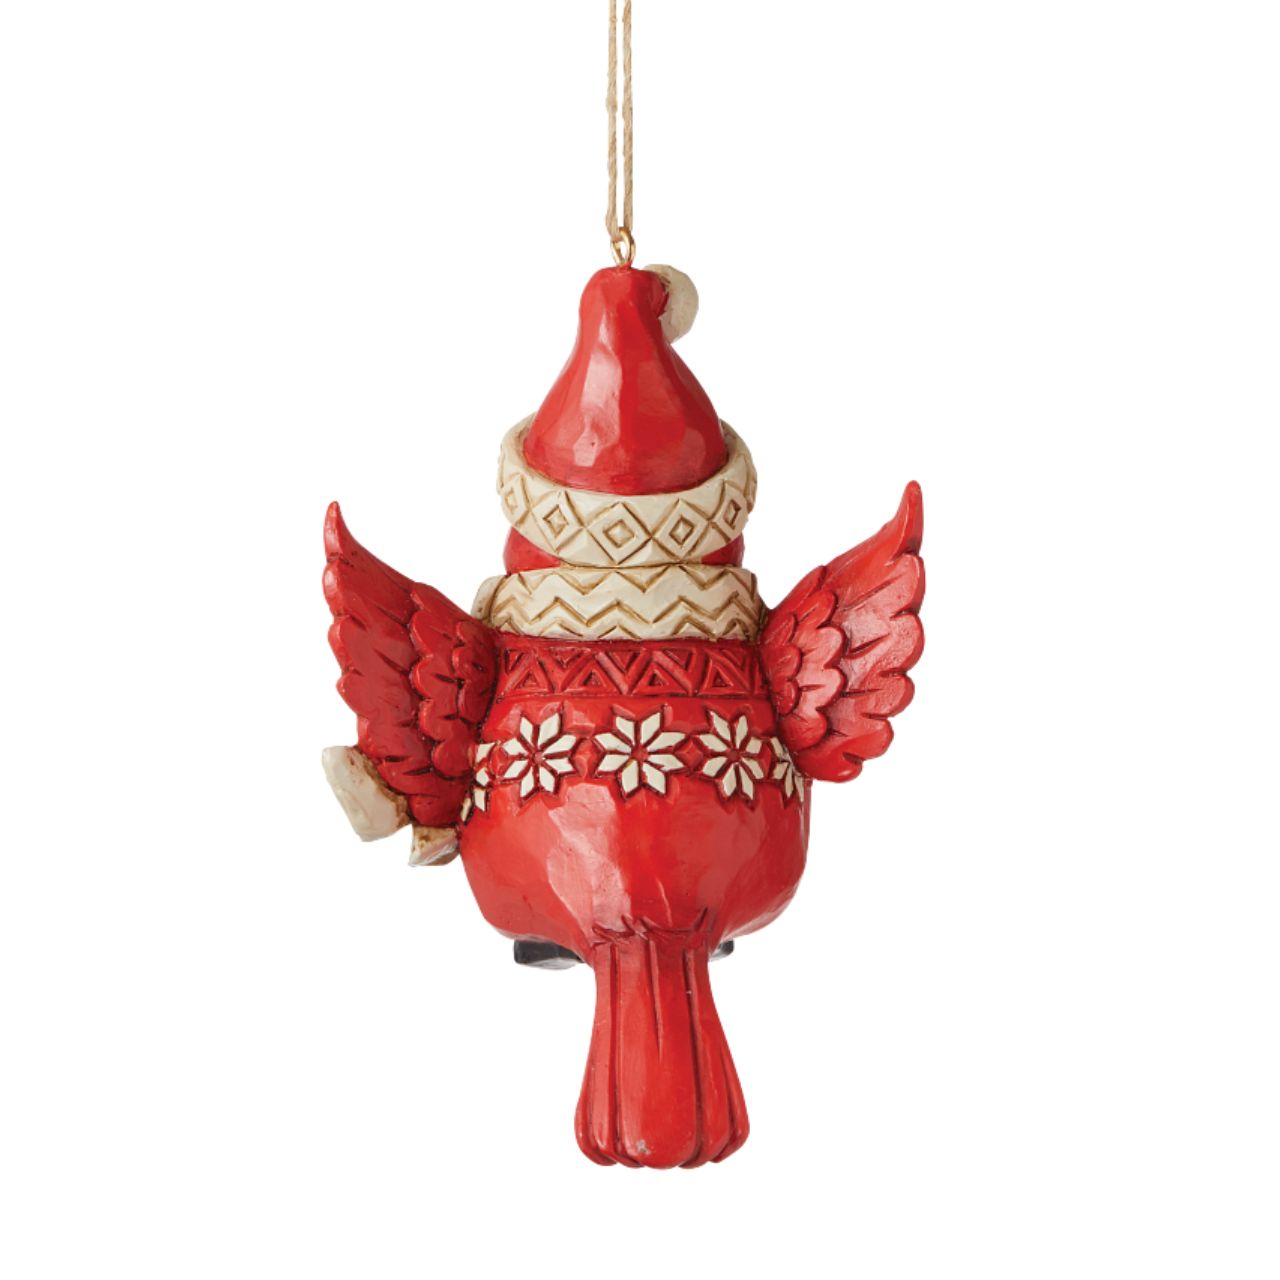 Nordic Noel Cardinal Christmas Hanging Ornament  Tweet your heart out alongside this cheery cardinal ornament. Wearing a patterned Santa hat and matching scarf, this charismatic cutie seems to flutter between your tree's branches with holiday excitement. With folksy patterned plumage, he soars.